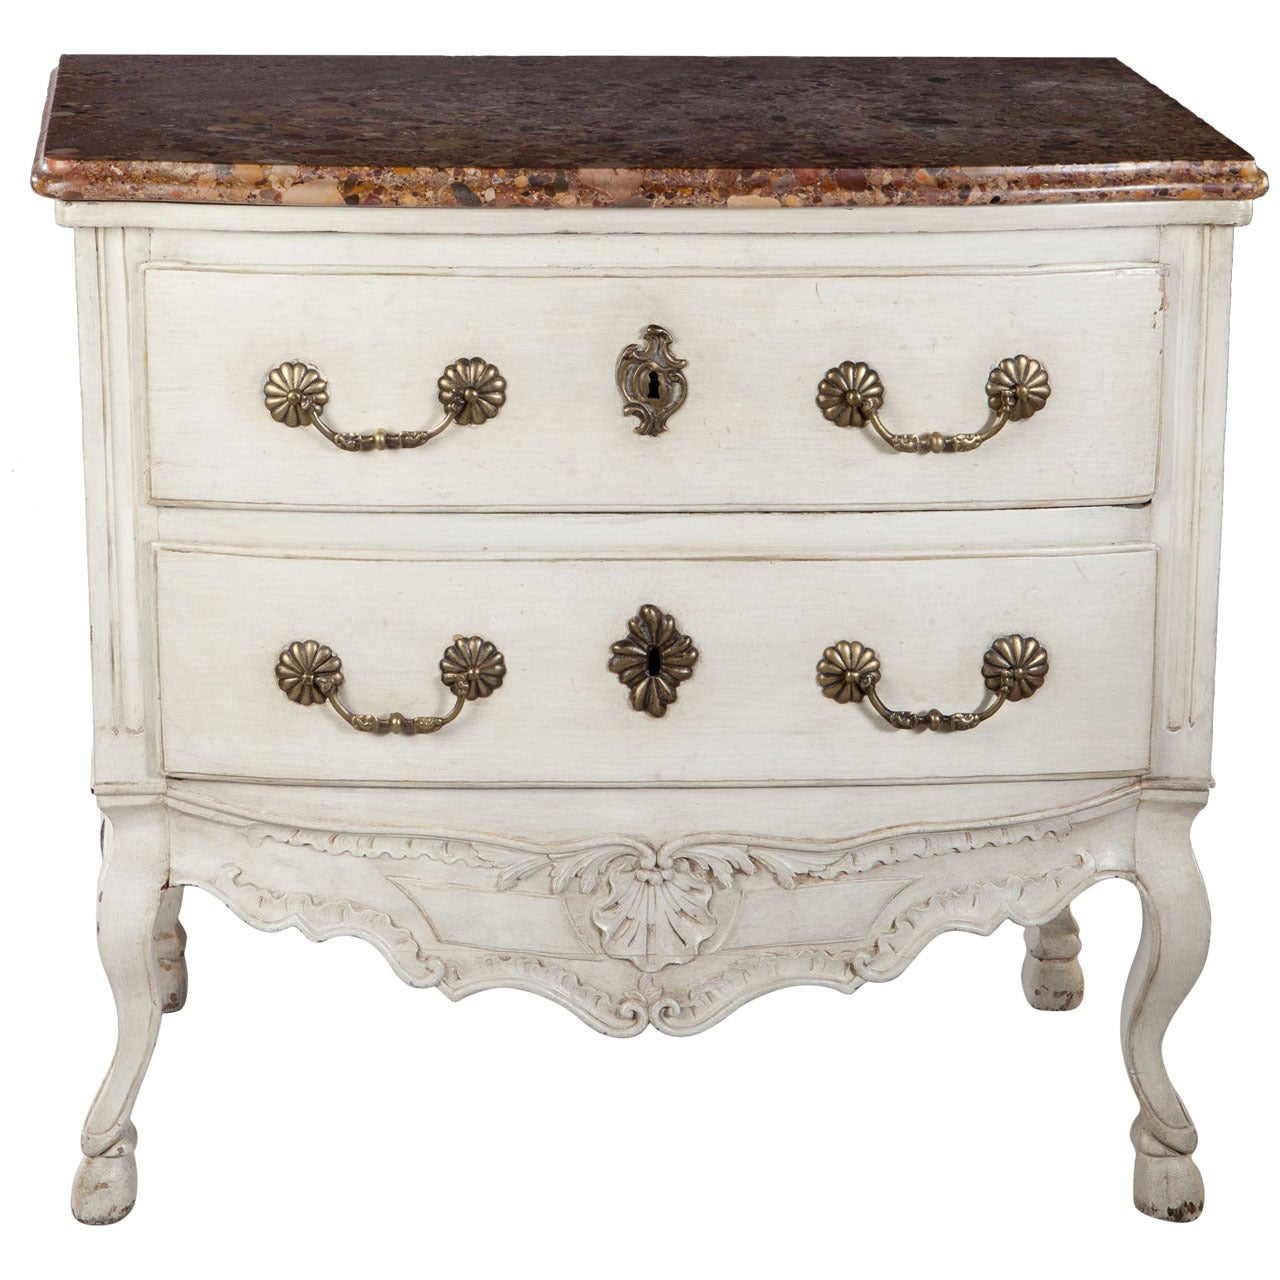 Early 18th Century French Commode